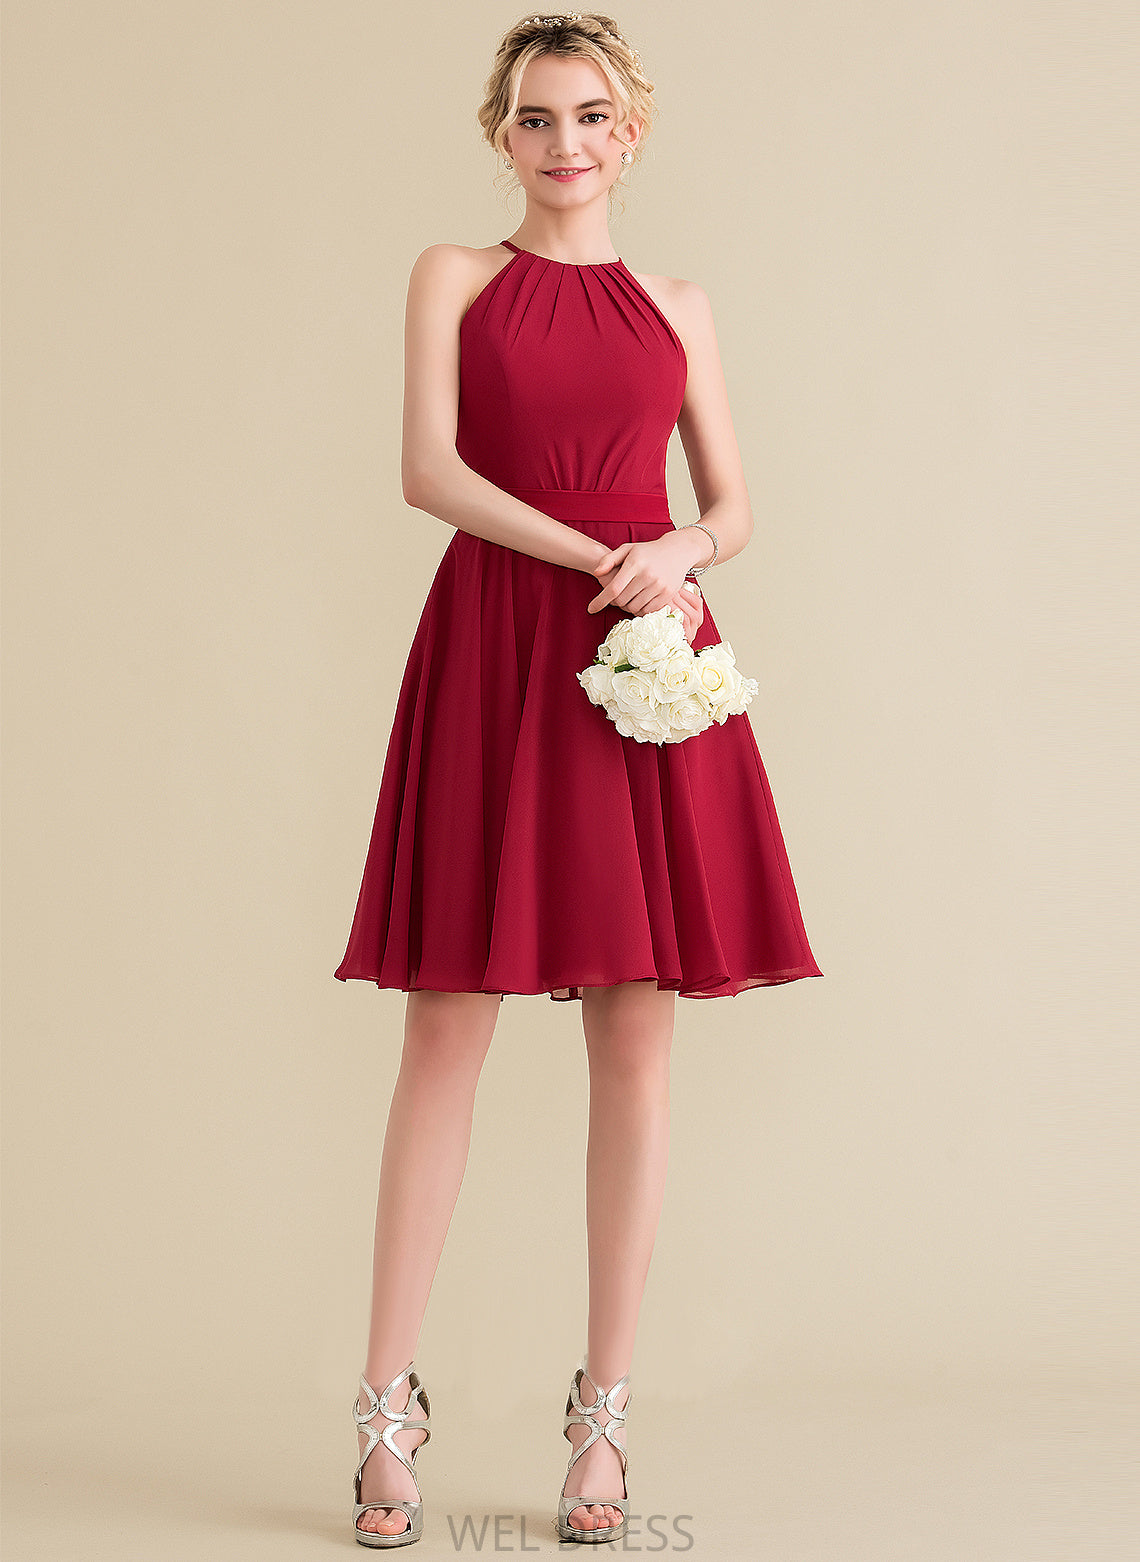 Knee-Length Bow(s) Dress Ruffle Chiffon A-Line Scoop Homecoming Dresses Homecoming Neck With Haylie